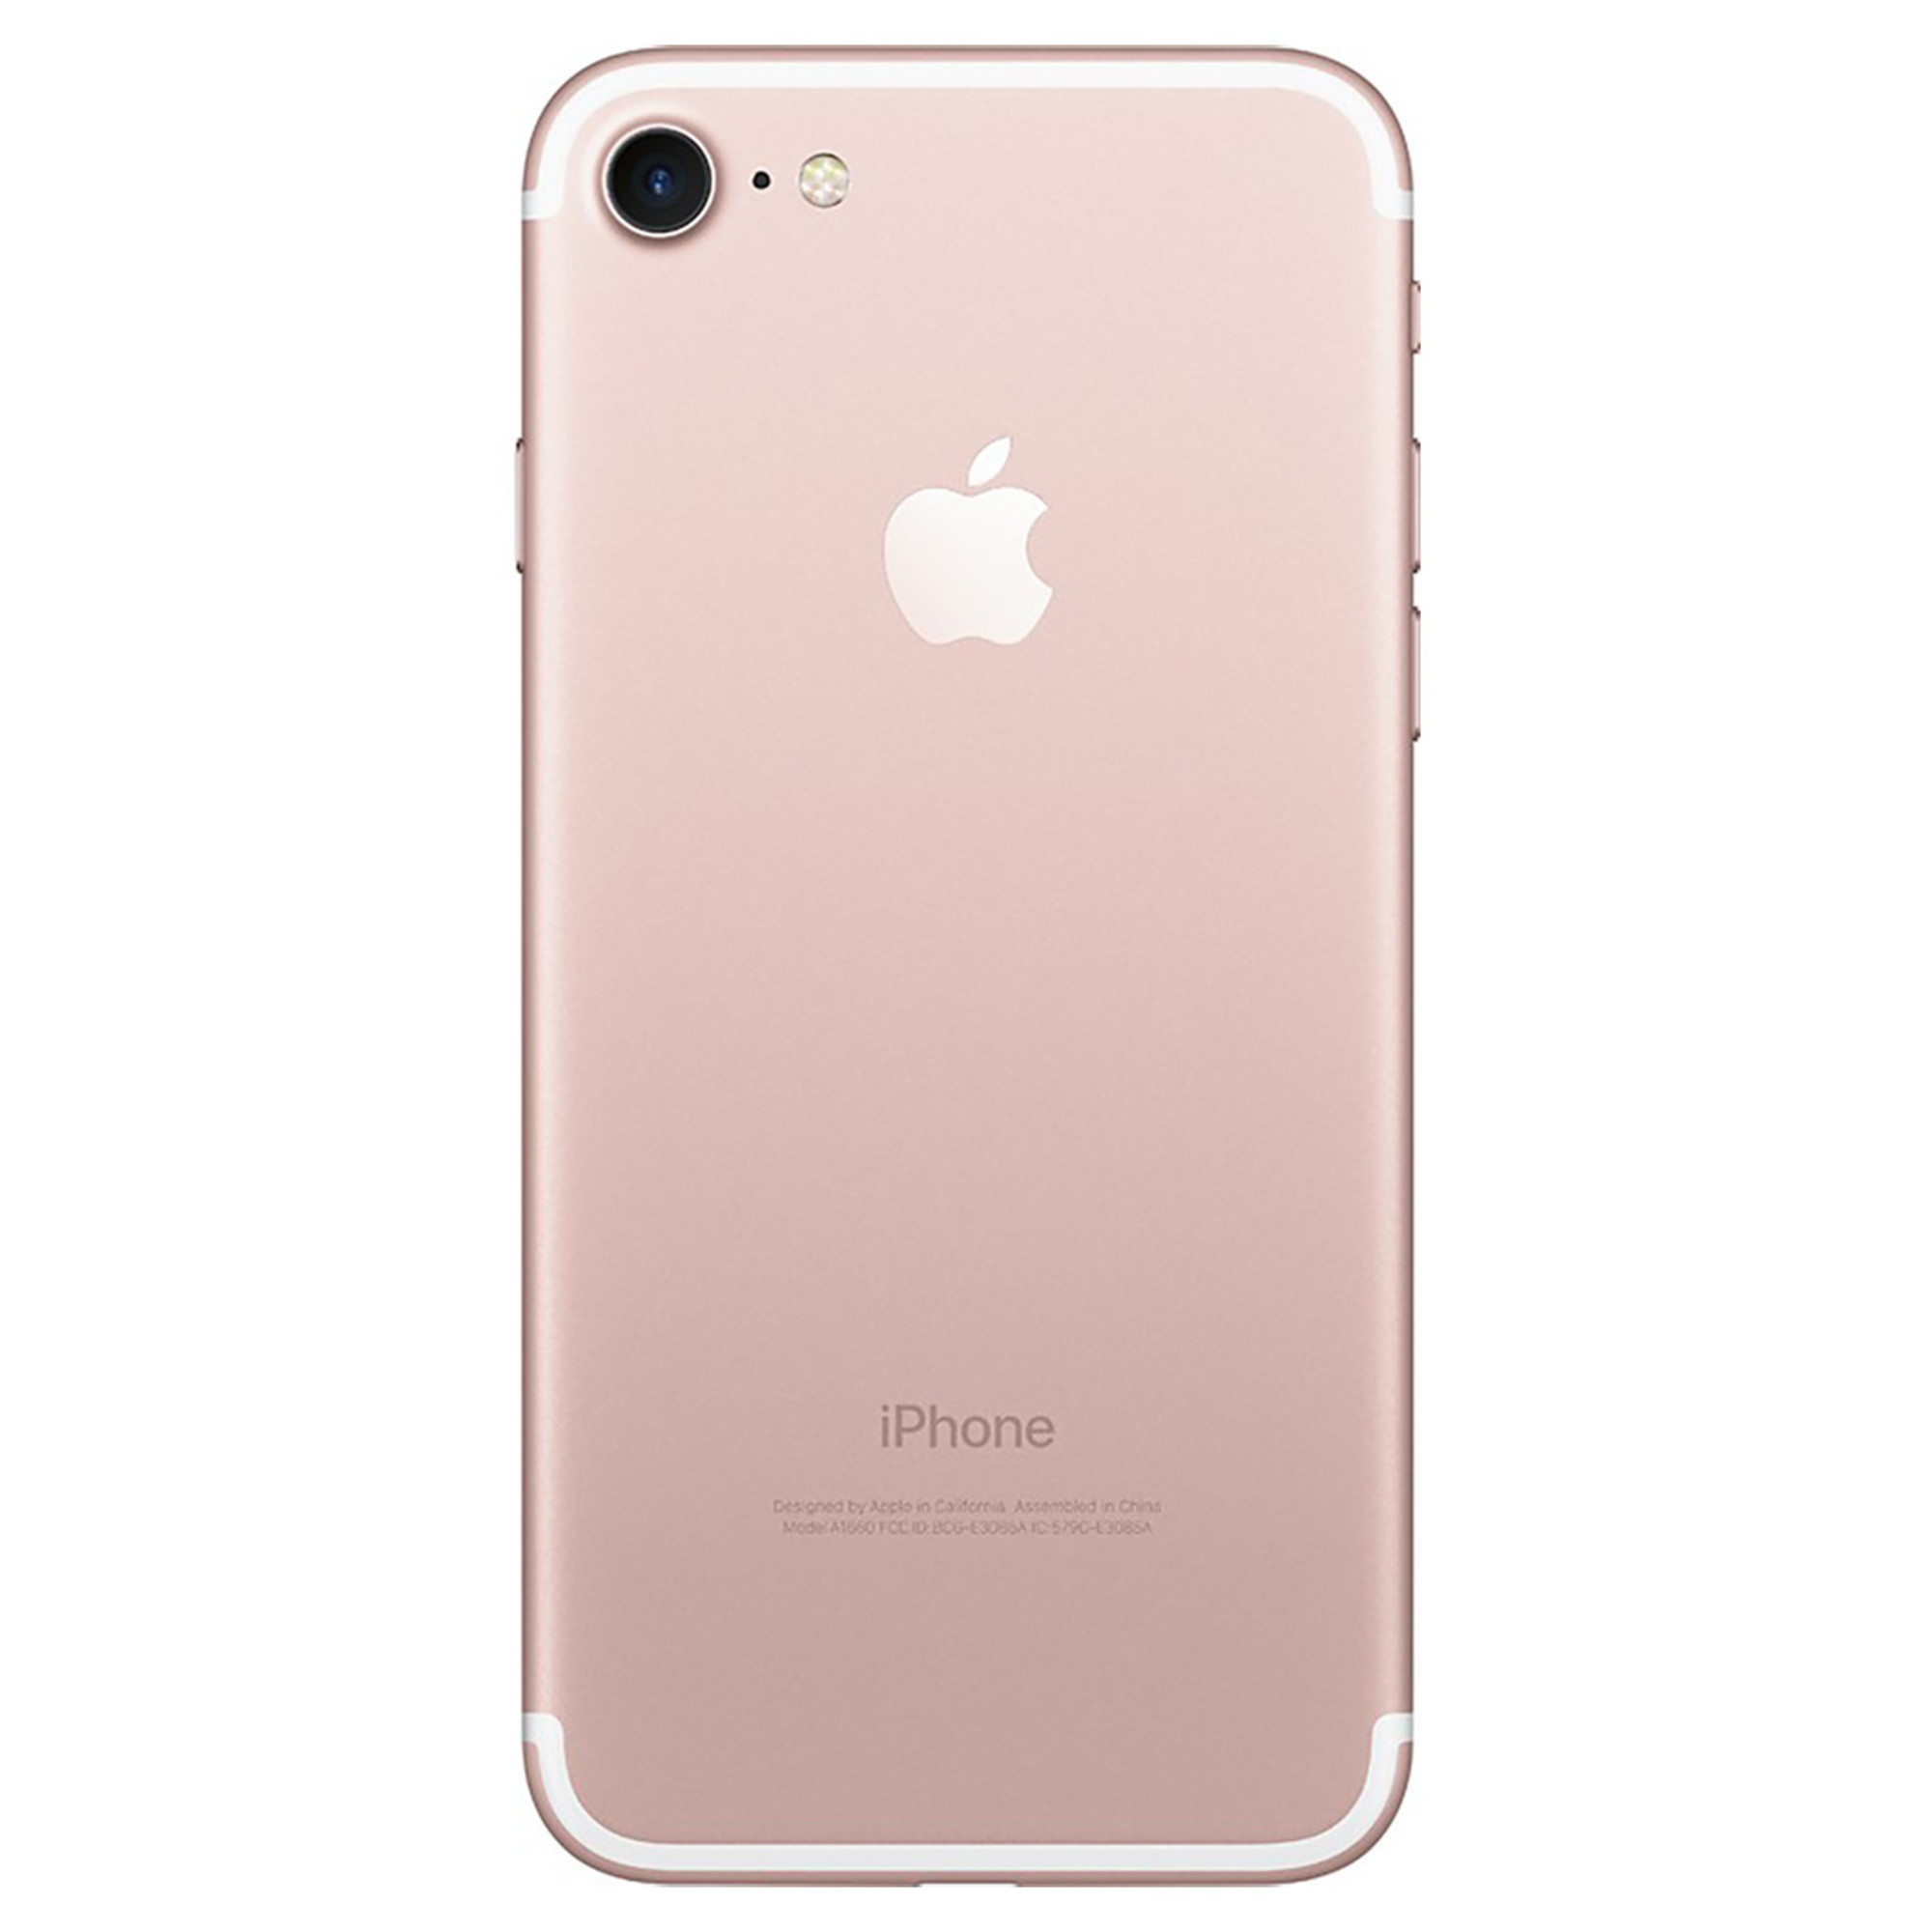 Pre-Owned Apple iPhone 7 - Carrier Unlocked - 256GB Rose Gold (Good) - image 4 of 4